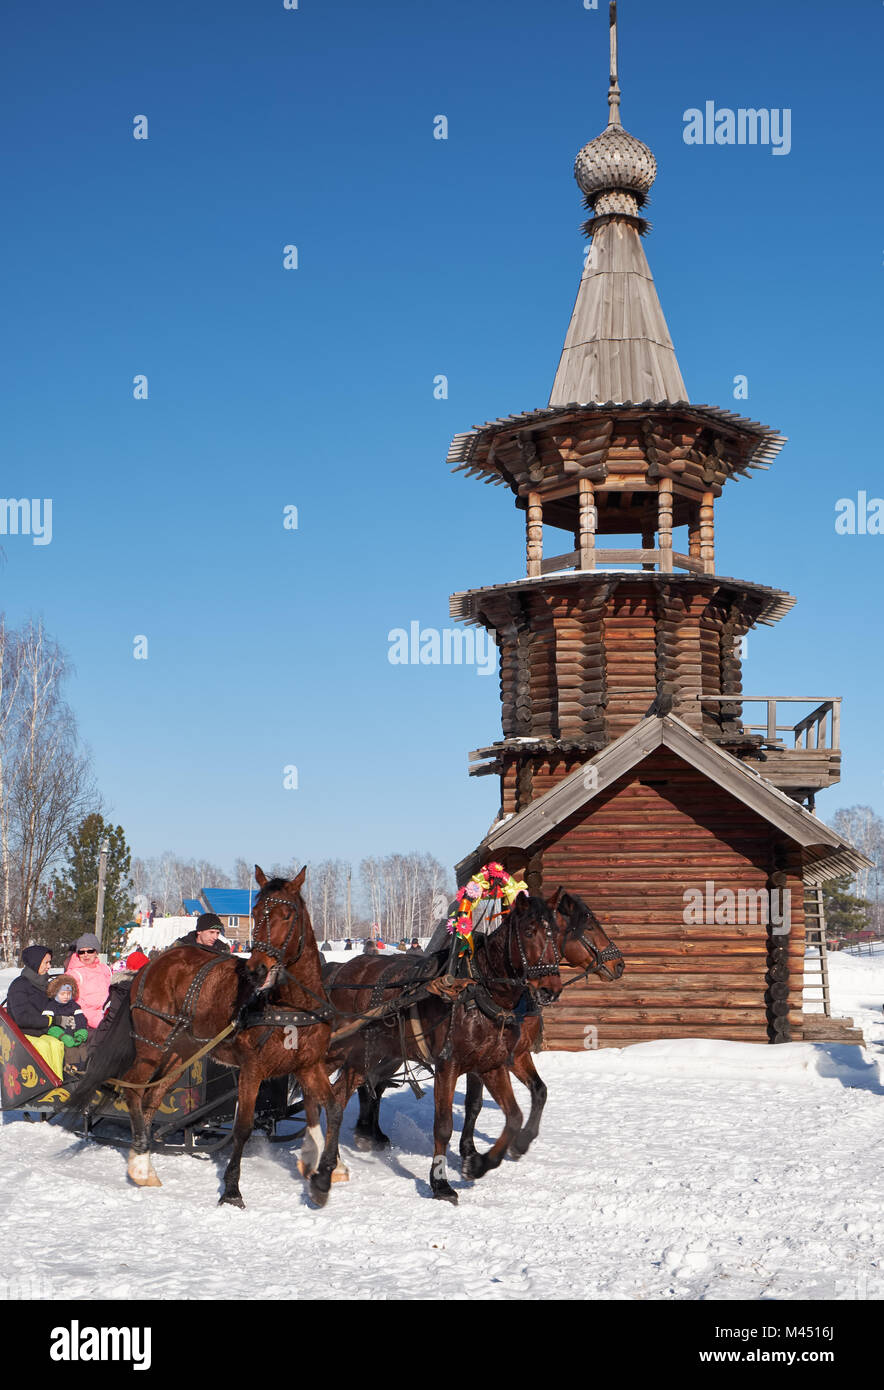 NOVOSIBIRSK, RUSSIA - JANUARY 11, 2018: Troika of horses harnessed to a sleigh.  Slavonic folk  winter festivities Shrovetide. The Church of the Savio Stock Photo